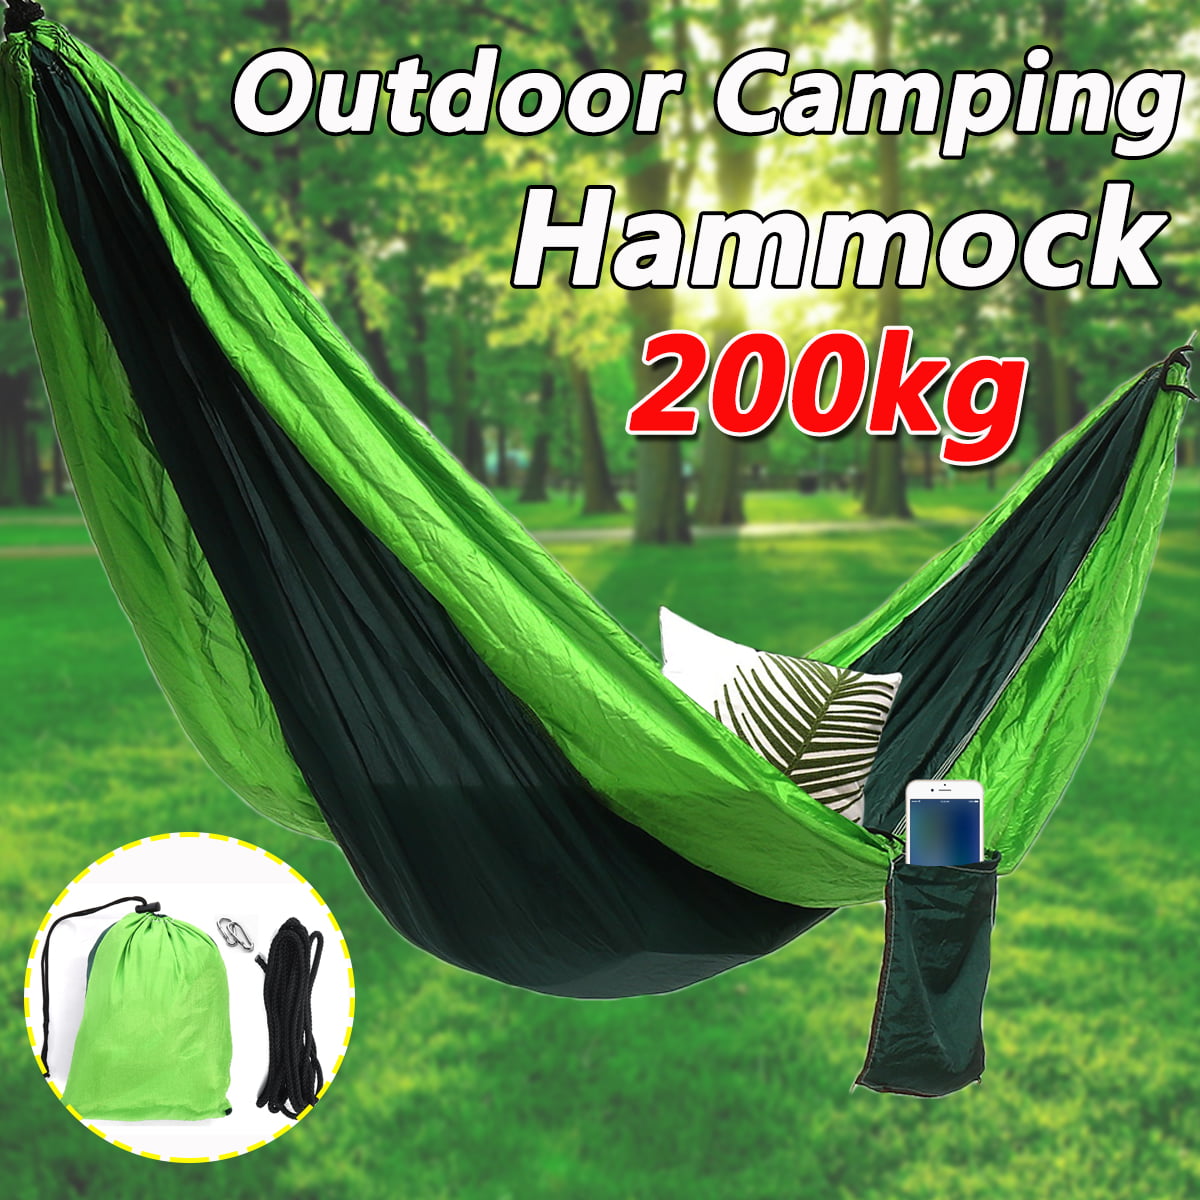 Camping Portable Hammock BrazilianStyle Garden Hanging Lazy Swing Chair Bed Gift 